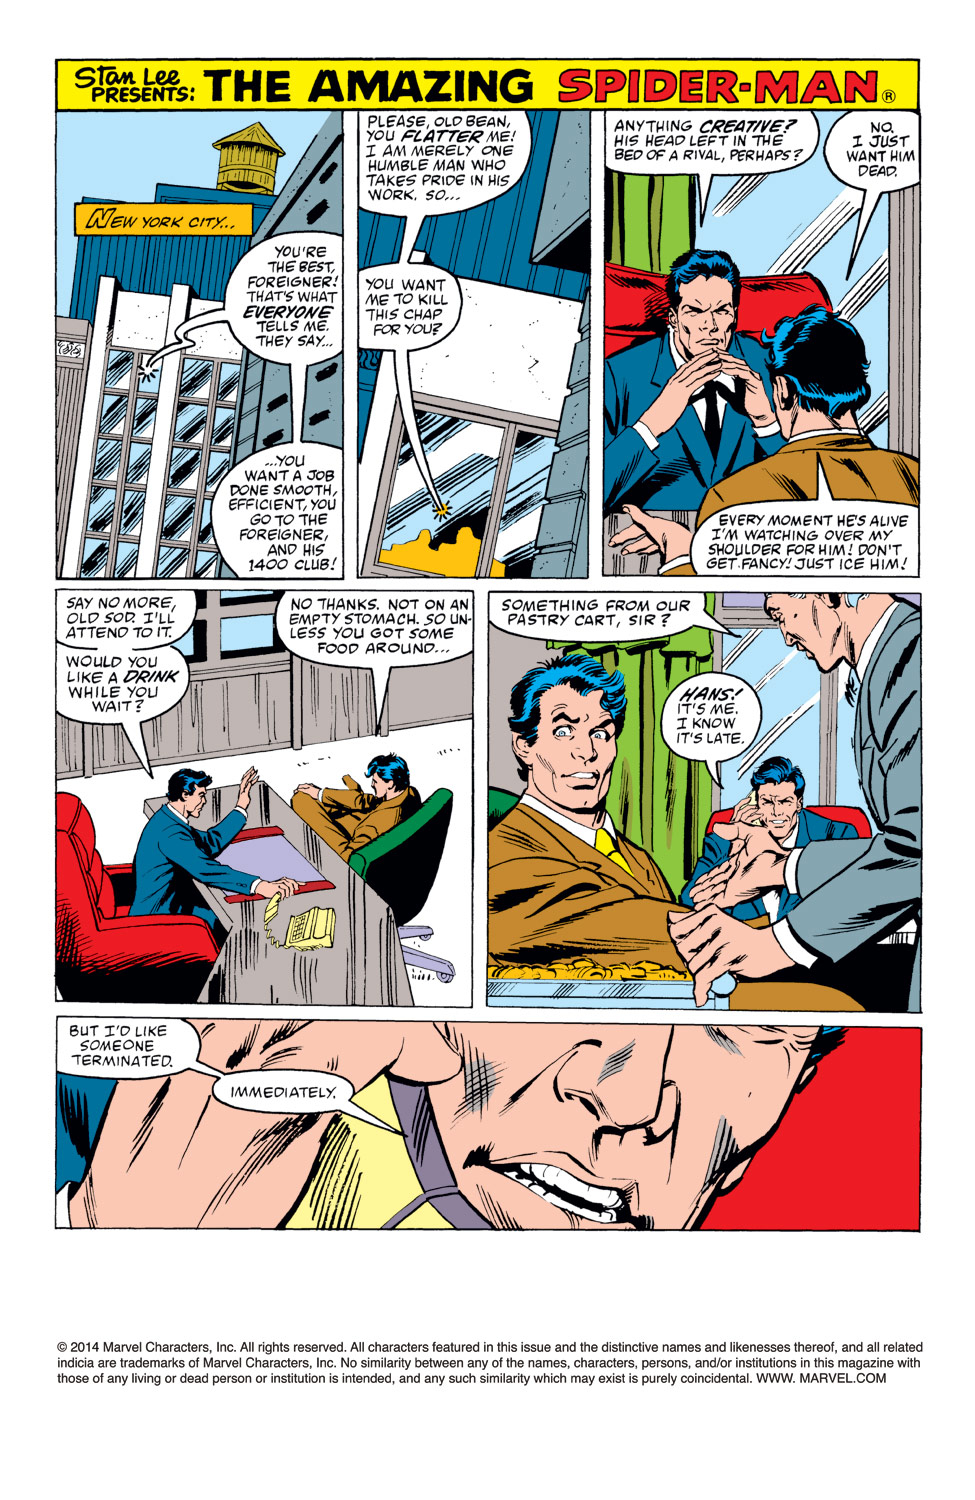 The Amazing Spider-Man (1963) 289 Page 1